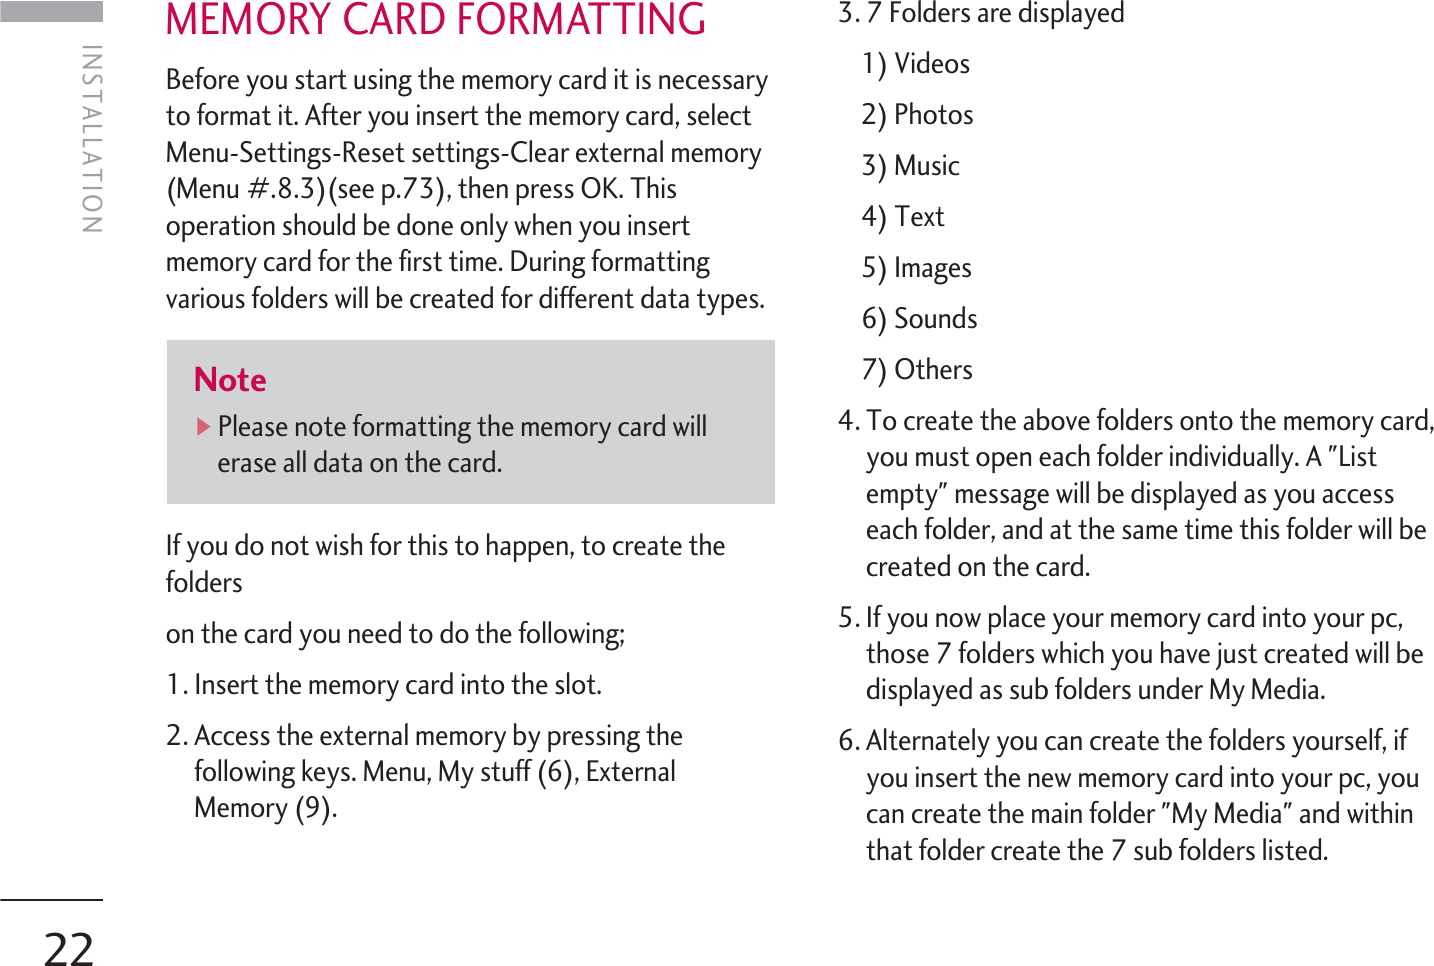 INSTALLATION22MEMORY CARD FORMATTINGBefore you start using the memory card it is necessaryto format it. After you insert the memory card, selectMenu-Settings-Reset settings-Clear external memory(Menu #.8.3)(see p.73), then press OK. Thisoperation should be done only when you insertmemory card for the first time. During formattingvarious folders will be created for different data types.If you do not wish for this to happen, to create thefolderson the card you need to do the following;1. Insert the memory card into the slot.2. Access the external memory by pressing thefollowing keys. Menu, My stuff (6), ExternalMemory (9).3. 7 Folders are displayed1) Videos2) Photos3) Music4) Text5) Images6) Sounds7) Others4. To create the above folders onto the memory card,you must open each folder individually. A &quot;Listempty&quot; message will be displayed as you accesseach folder, and at the same time this folder will becreated on the card.5. If you now place your memory card into your pc,those 7 folders which you have just created will bedisplayed as sub folders under My Media.6. Alternately you can create the folders yourself, ifyou insert the new memory card into your pc, youcan create the main folder &quot;My Media&quot; and withinthat folder create the 7 sub folders listed.Note]Please note formatting the memory card willerase all data on the card. INSTALLATION